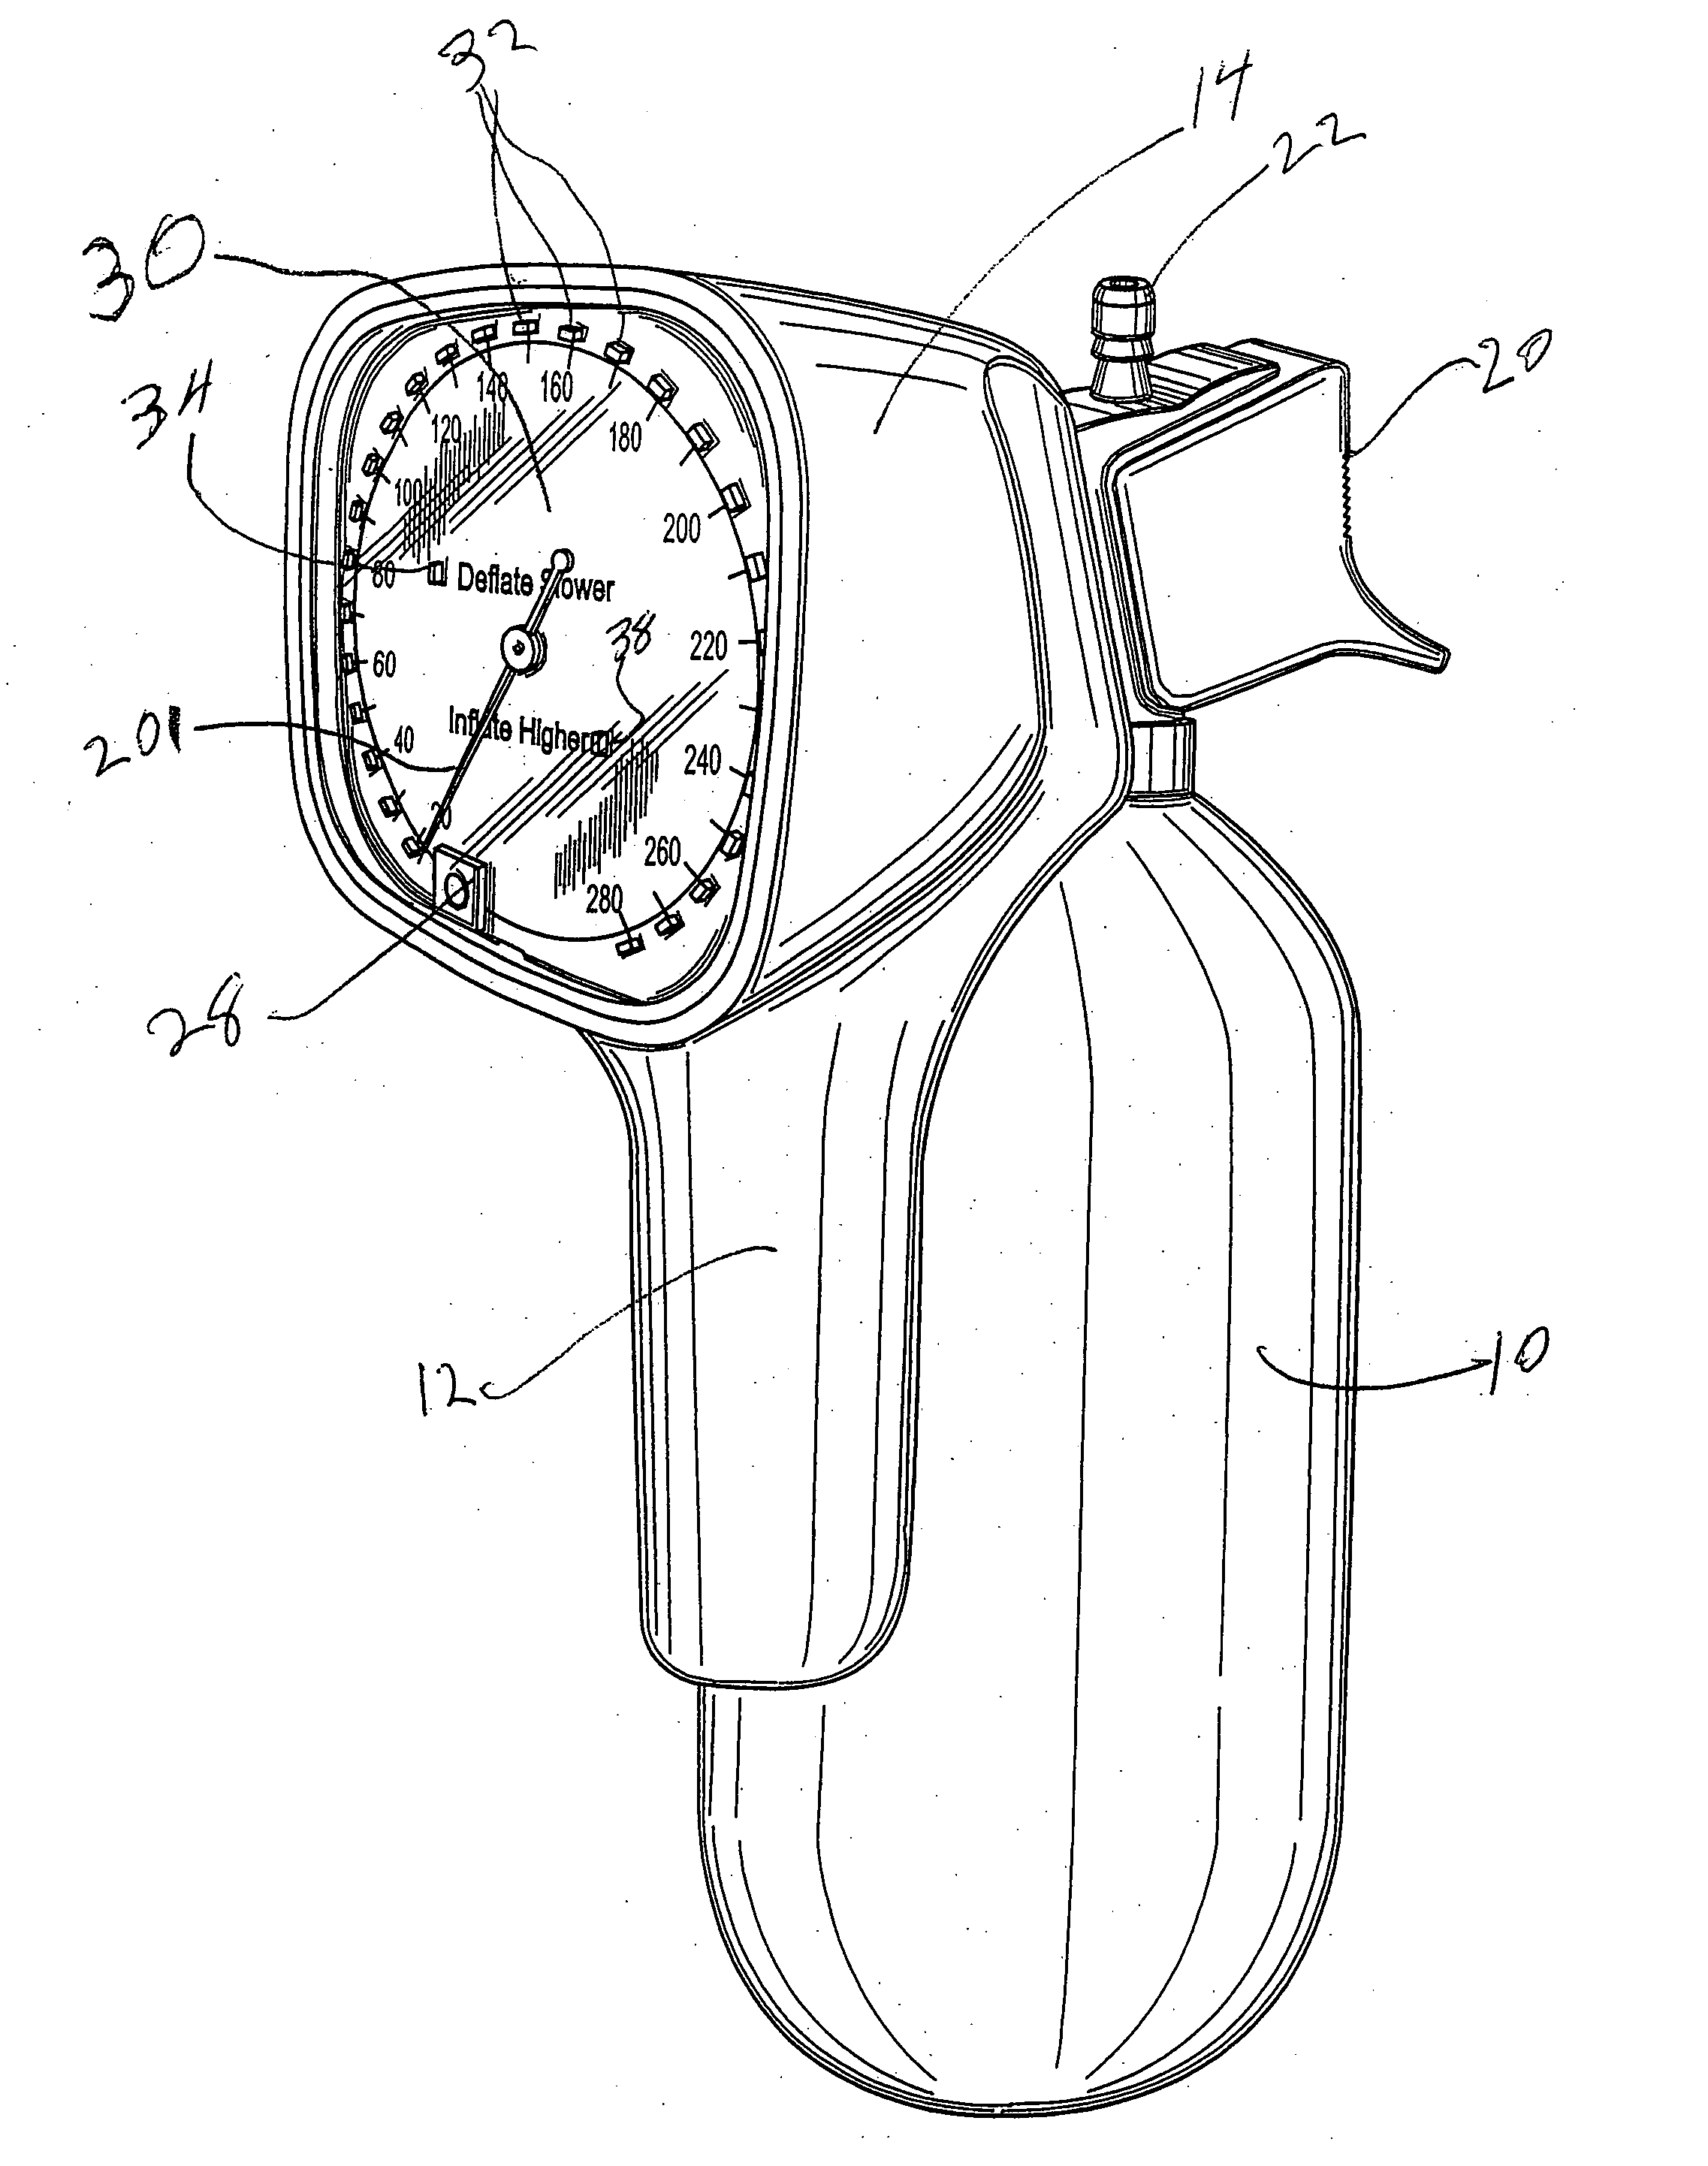 Integrated manual mechanical and electronic sphygmomanometer within a single enclosure